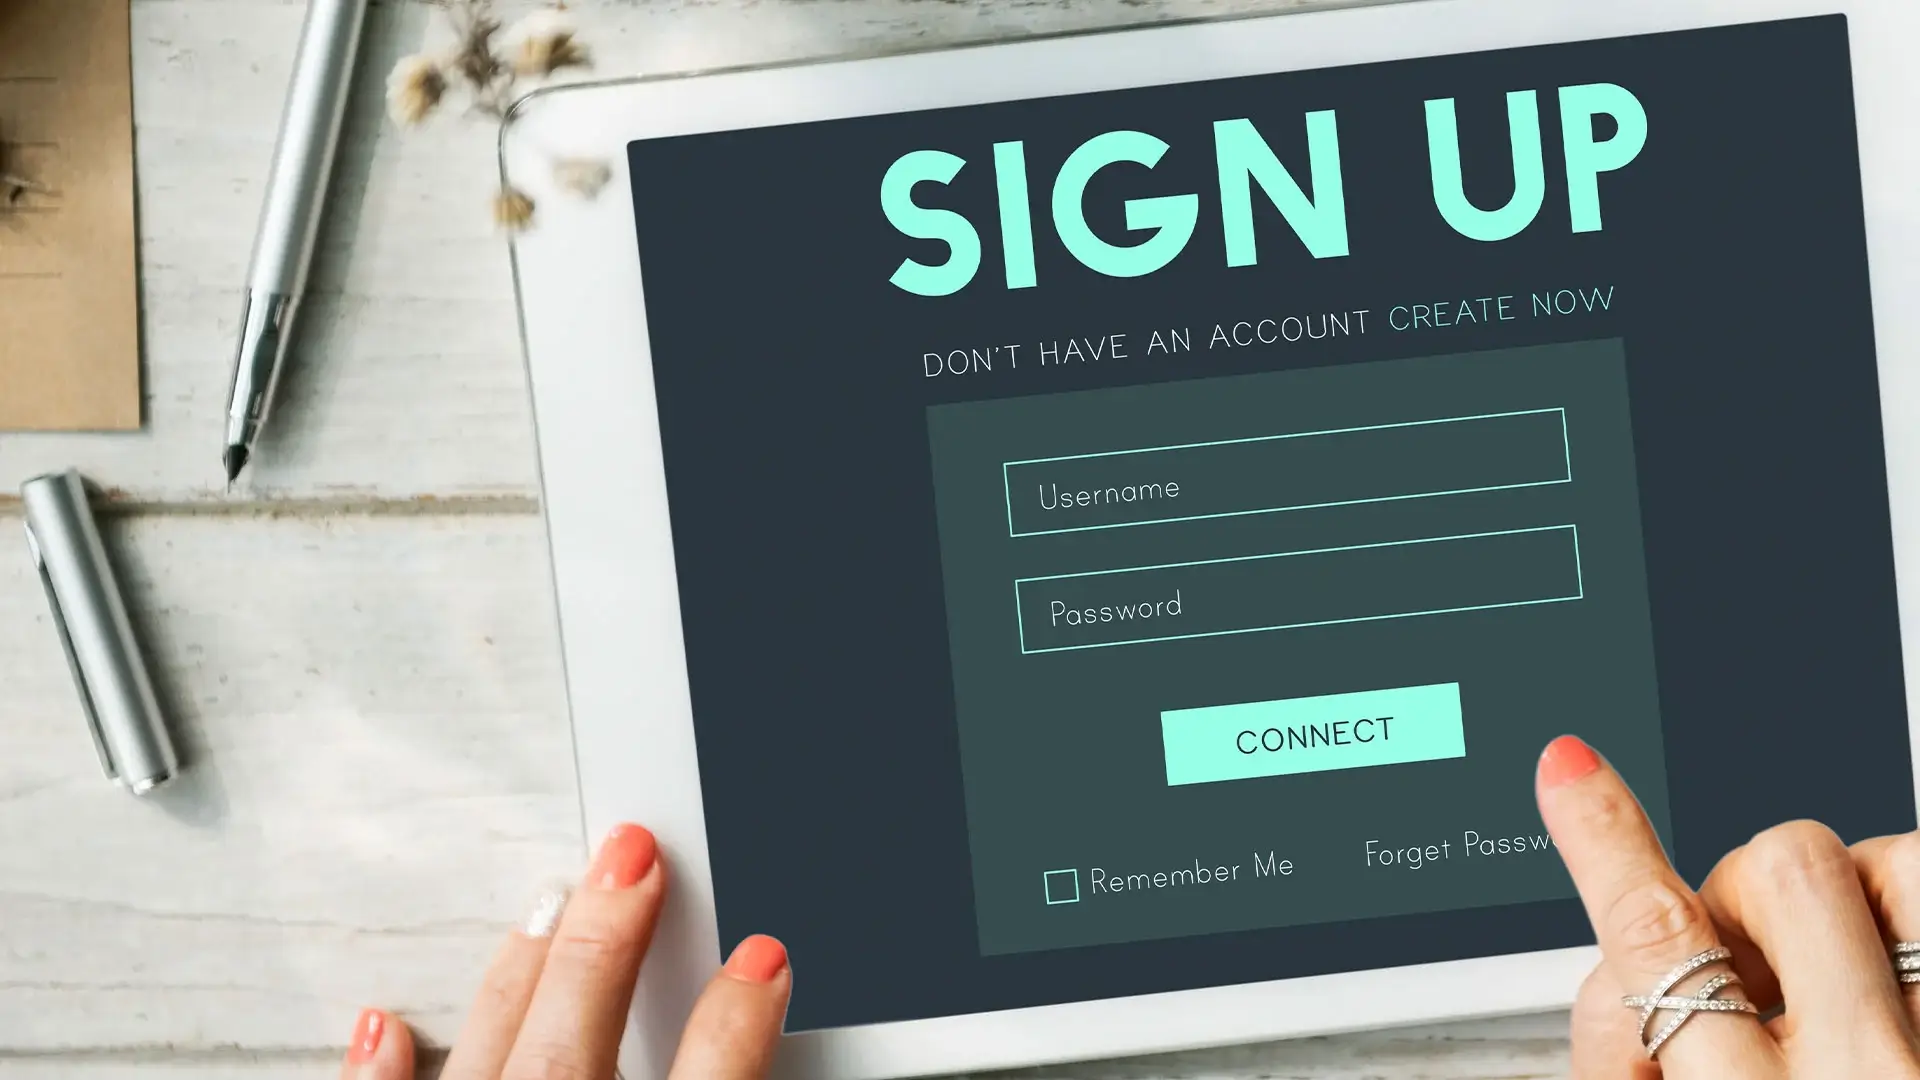 A person's hand is touching a digital tablet screen with a sign-up form displayed, including fields for username and password and a button that says "Connect".